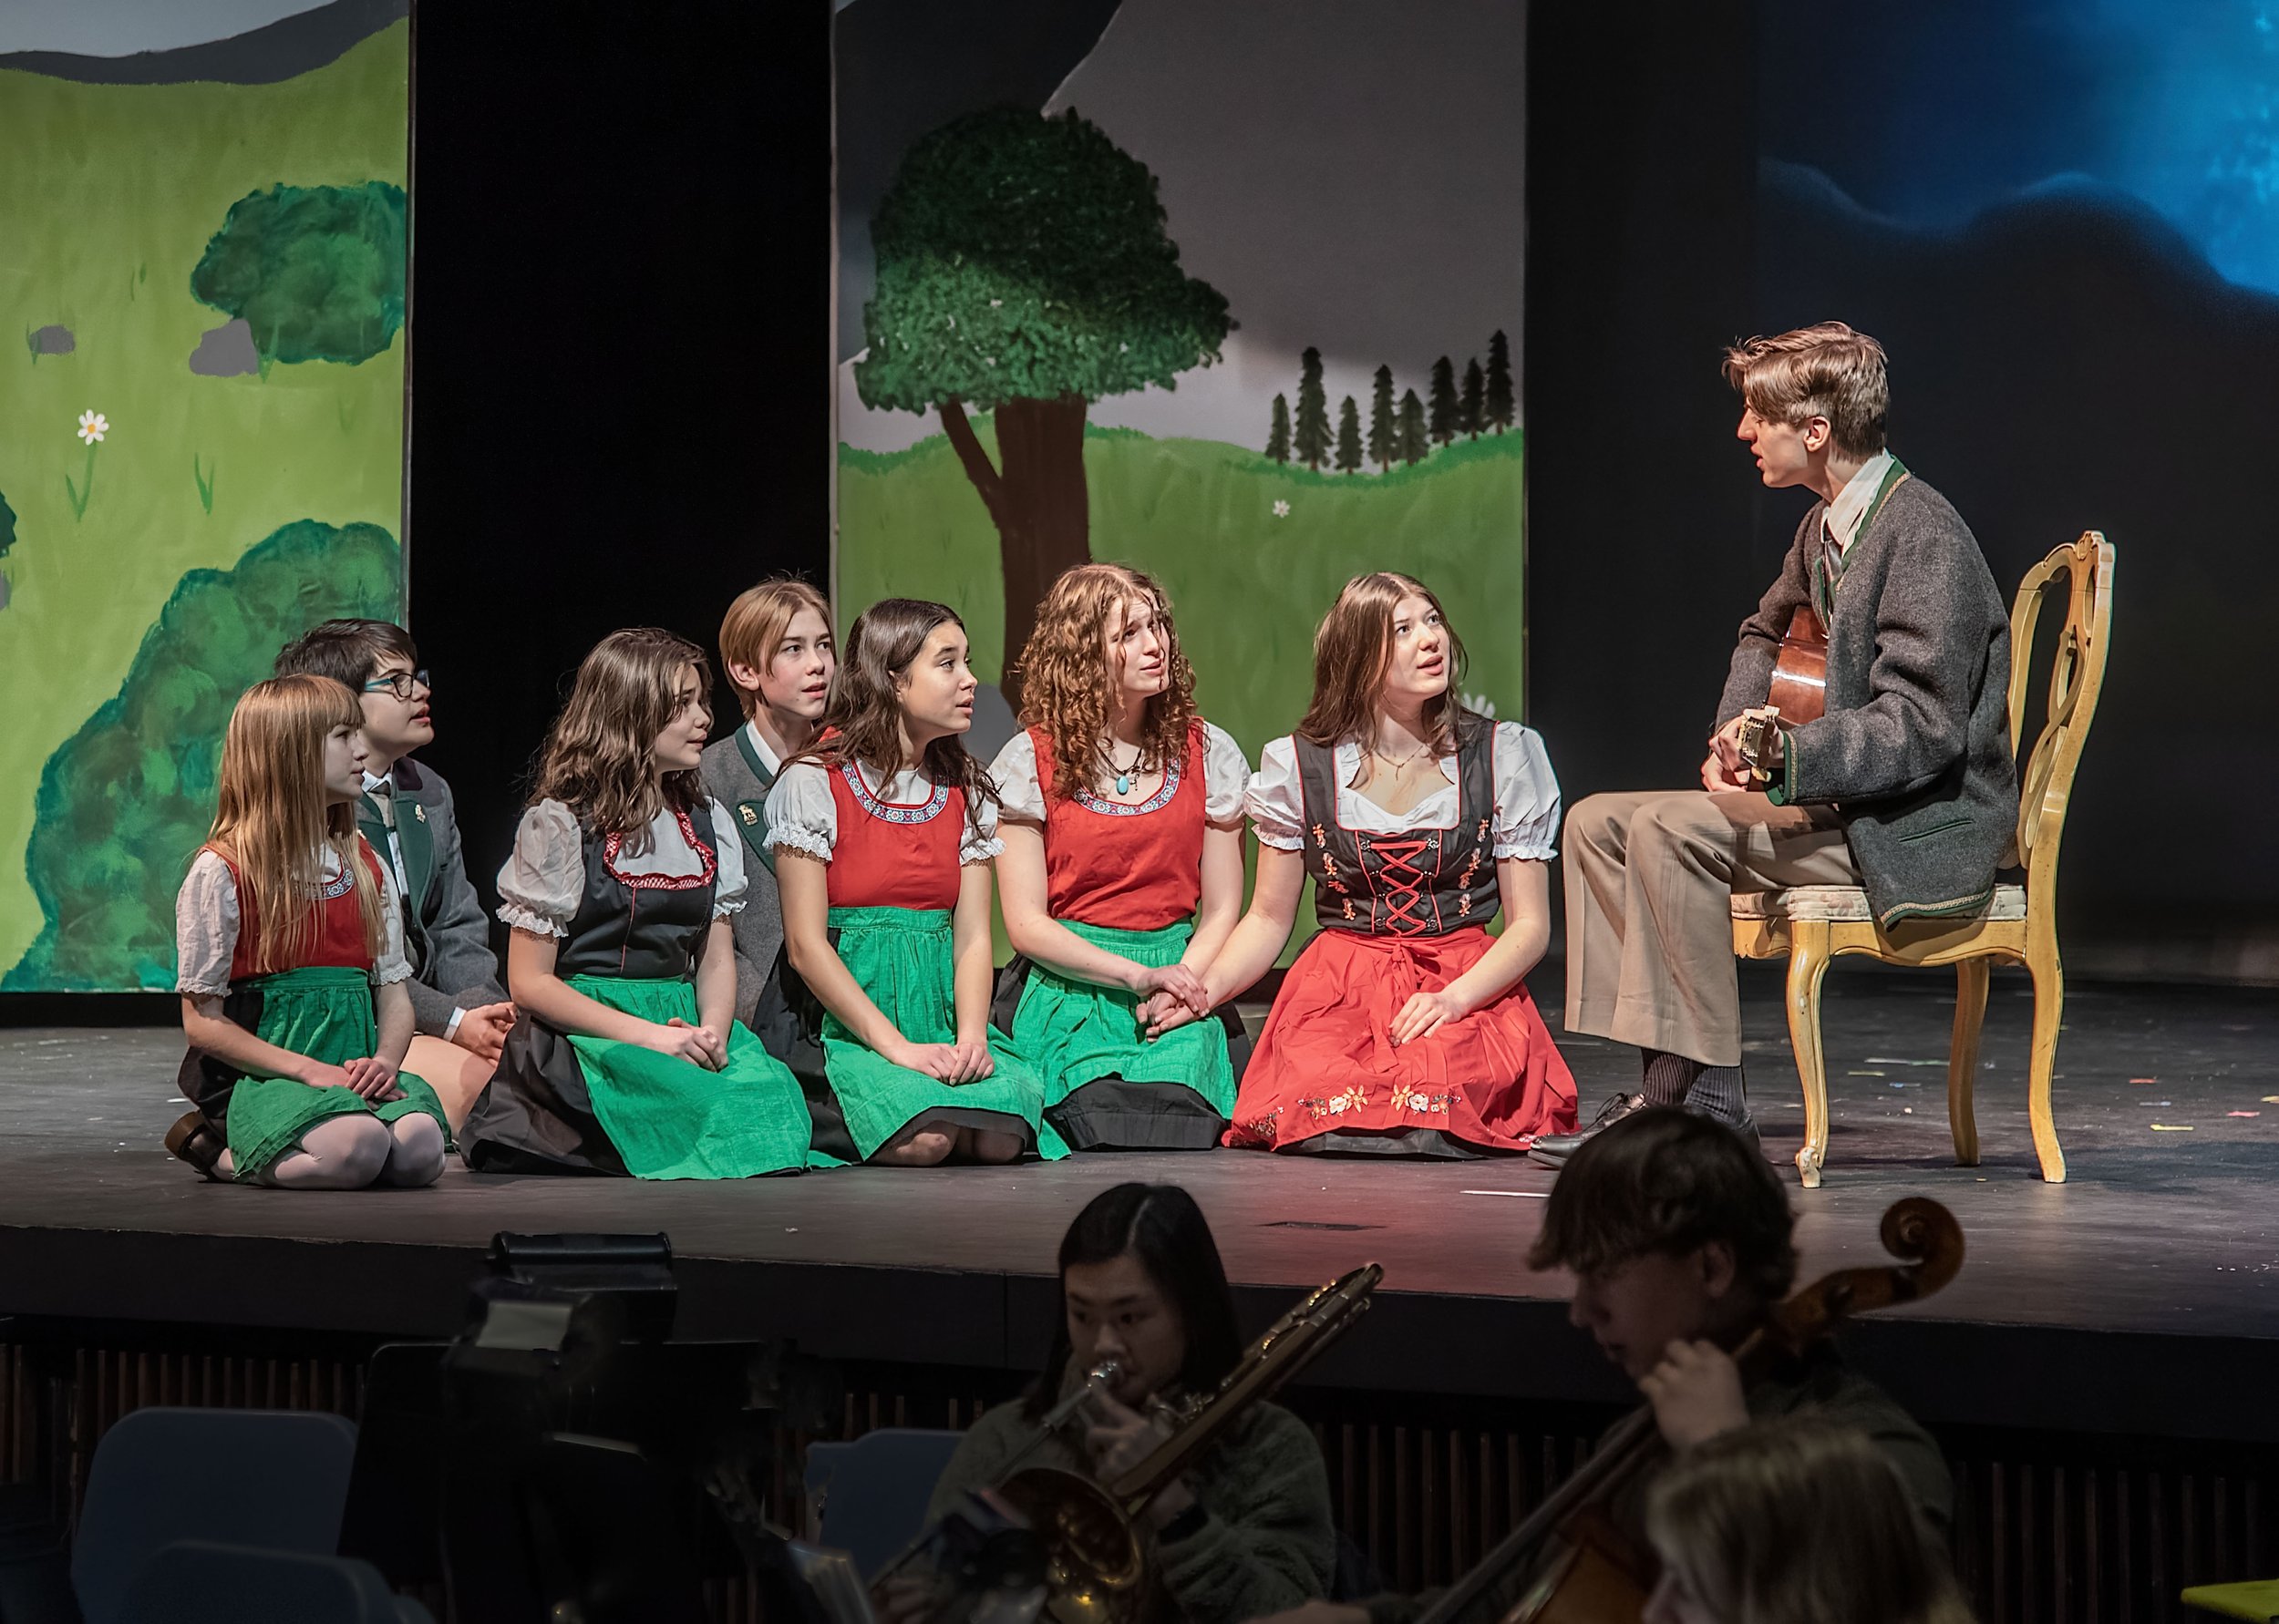   Dress rehearsal on Tuesday evening has the Harwood cast of "The Sound of Music" on stage and musicians accompanying them below. Photo by Gordon Miller  